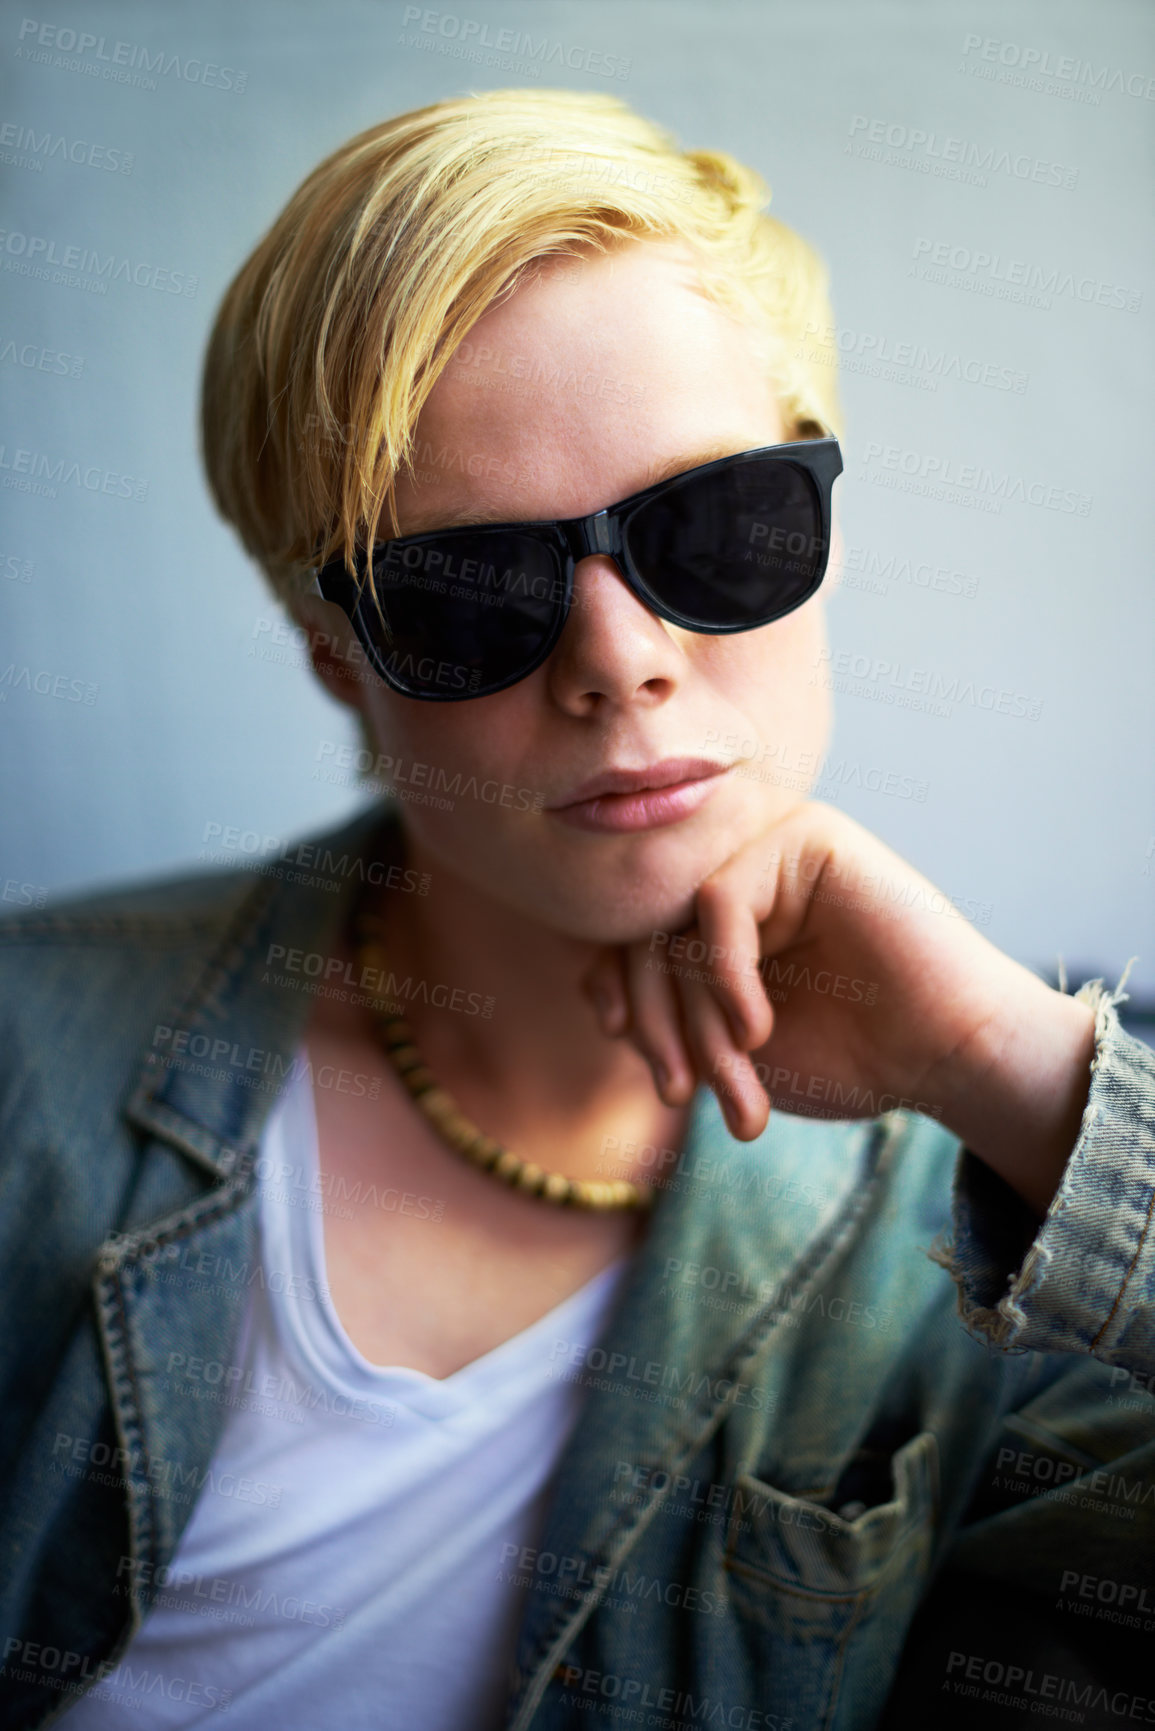 Buy stock photo Attractive young guy wearing hipster shades with his hand on his chin